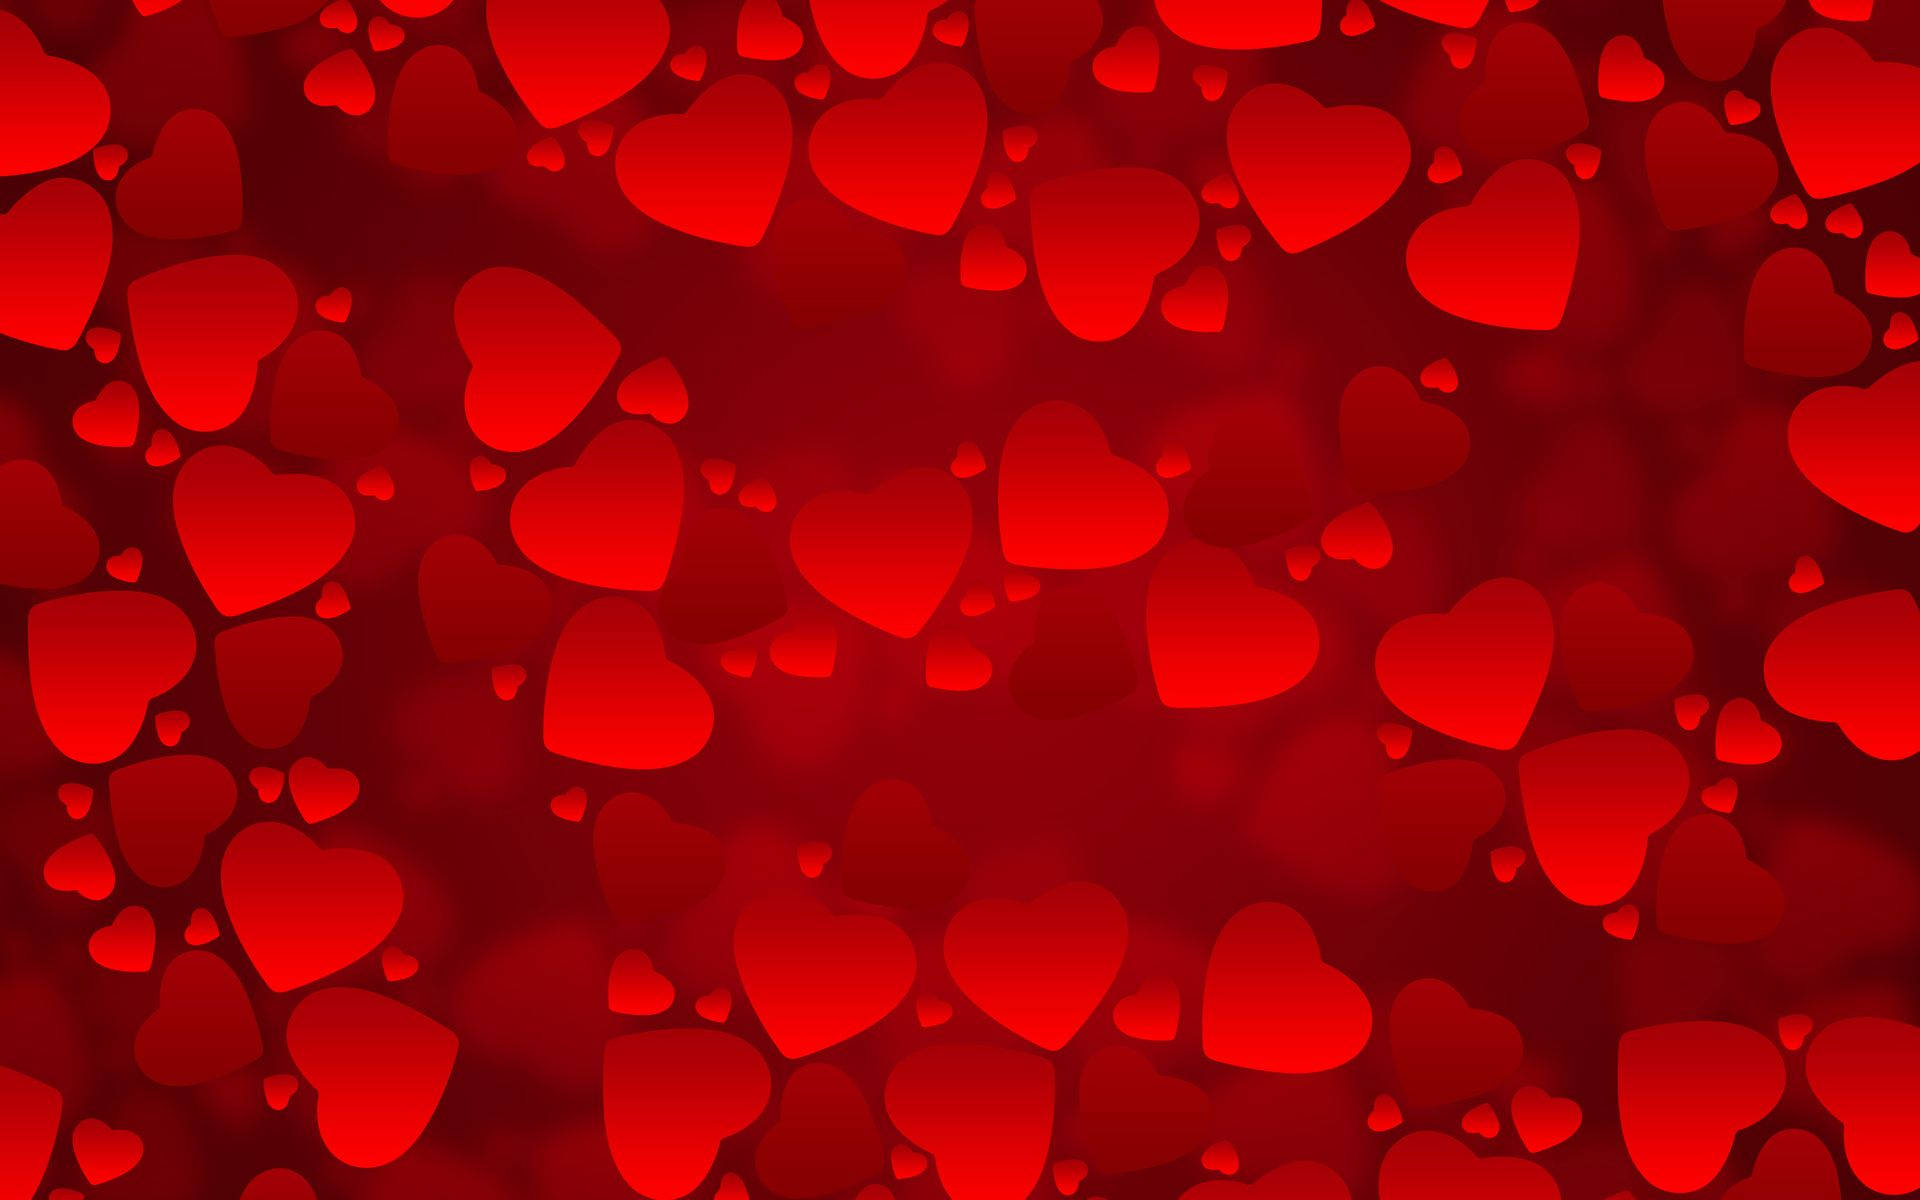 Red Hearts Of Love Floating